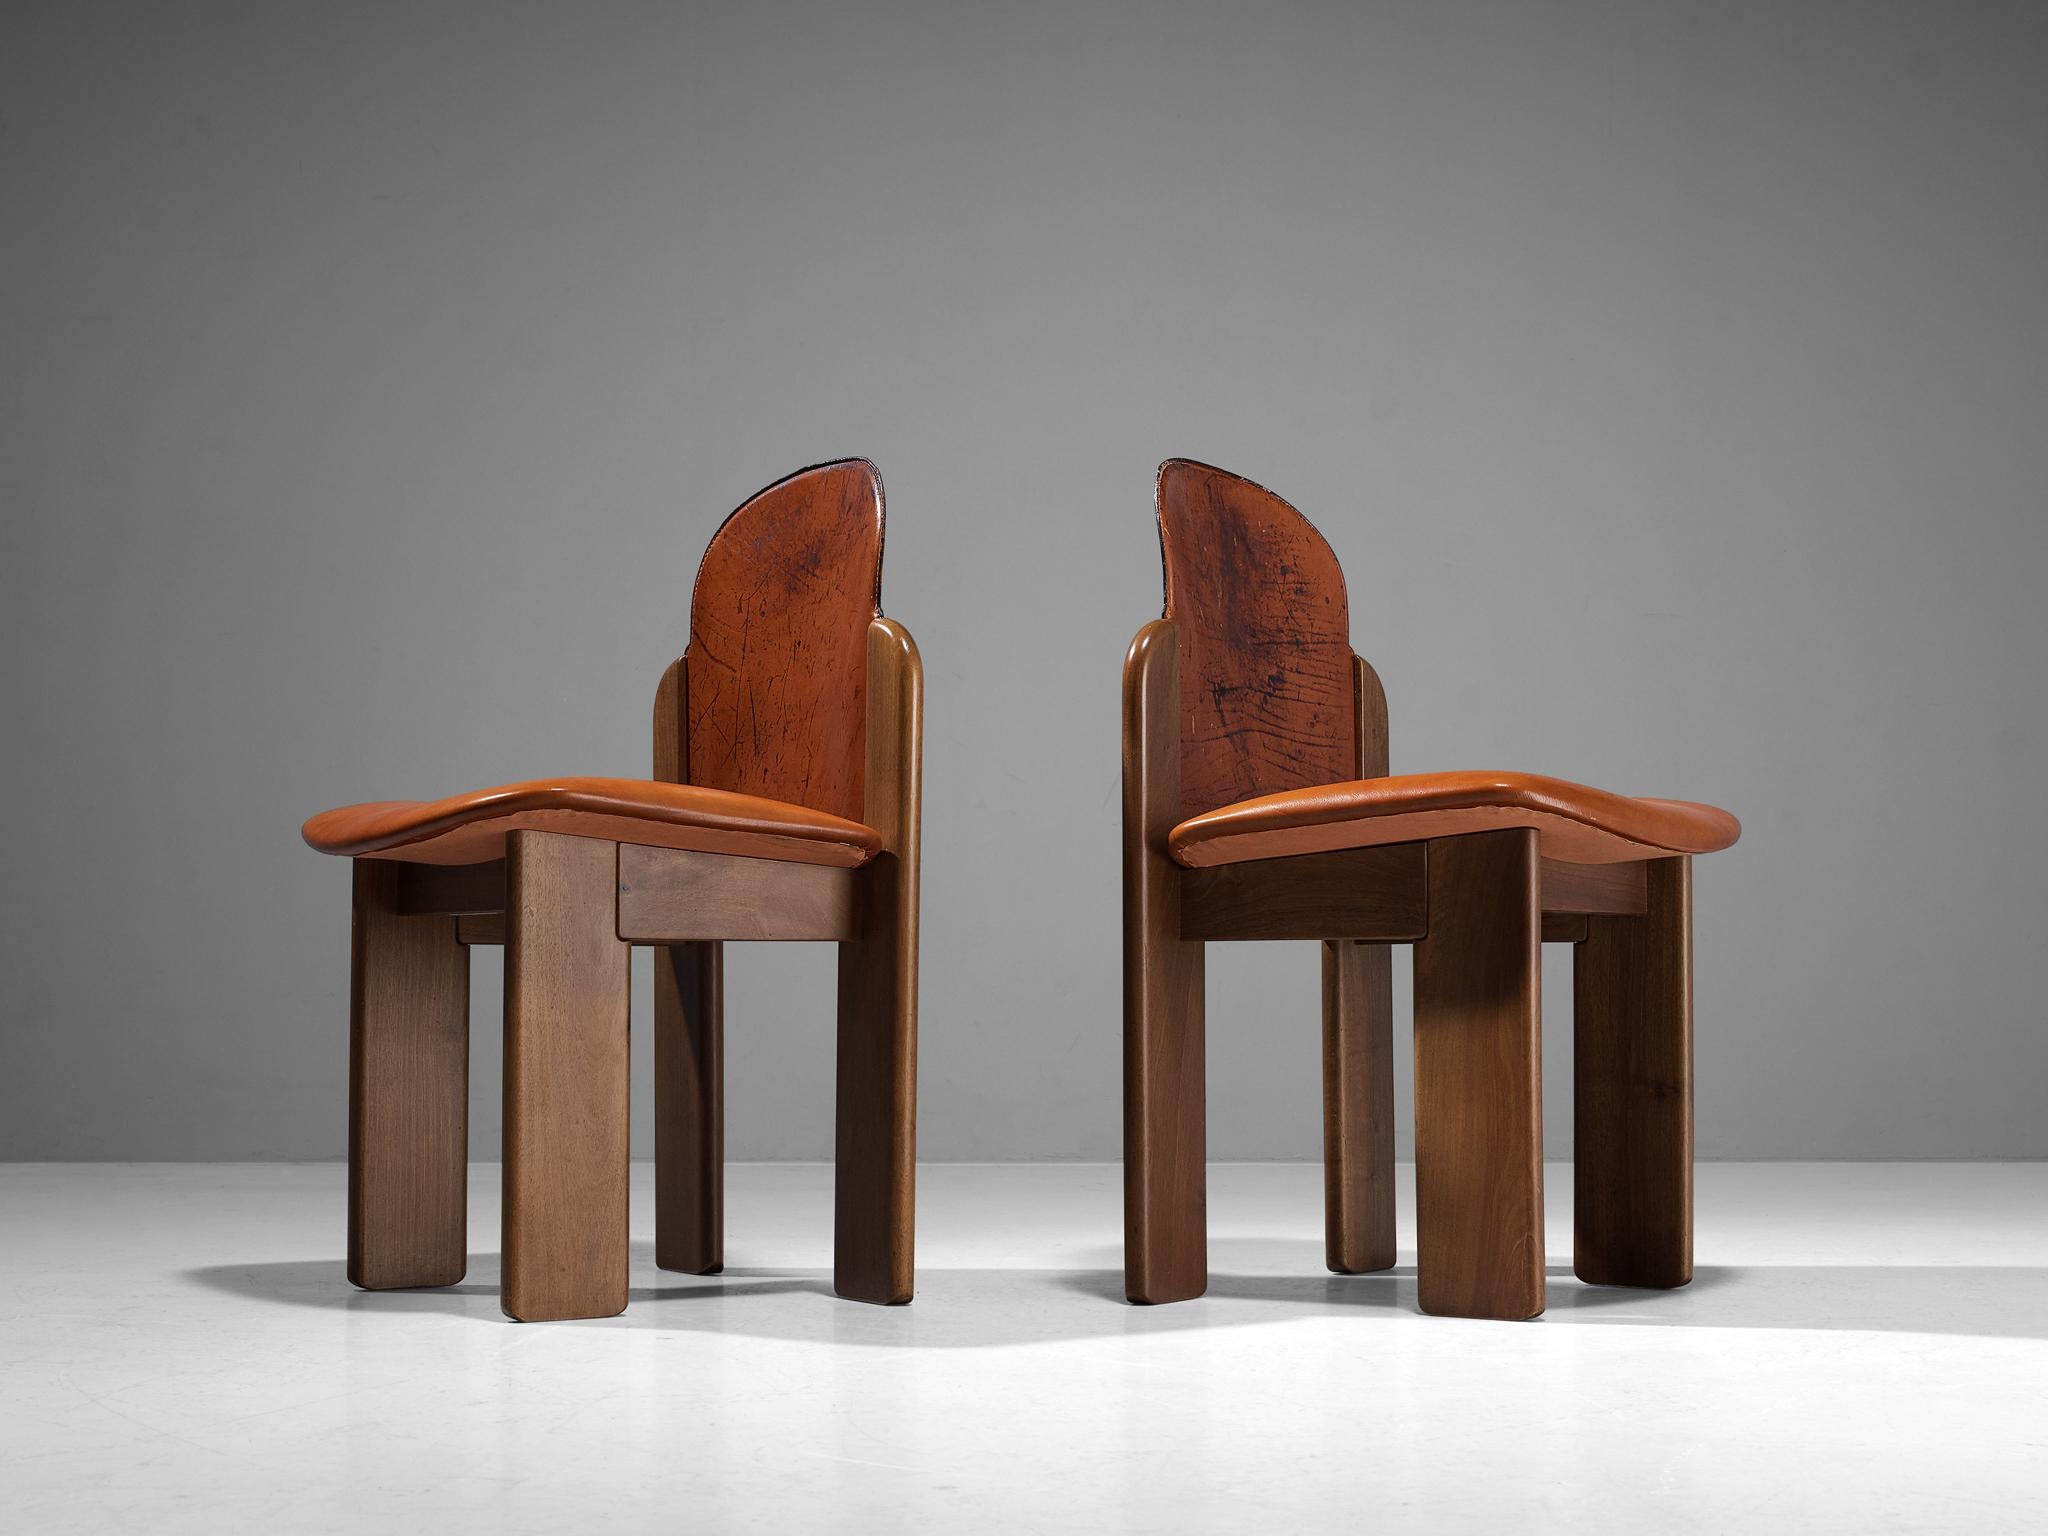 Silvio Coppola for Fratelli Montina, '330' dining chairs, walnut, leather, Italy, 1970s

Stunning organic looking dining pair of chairs by Italian designer Silvio Coppola. These chairs are made in walnut wood and a beautifully patinated leather in a